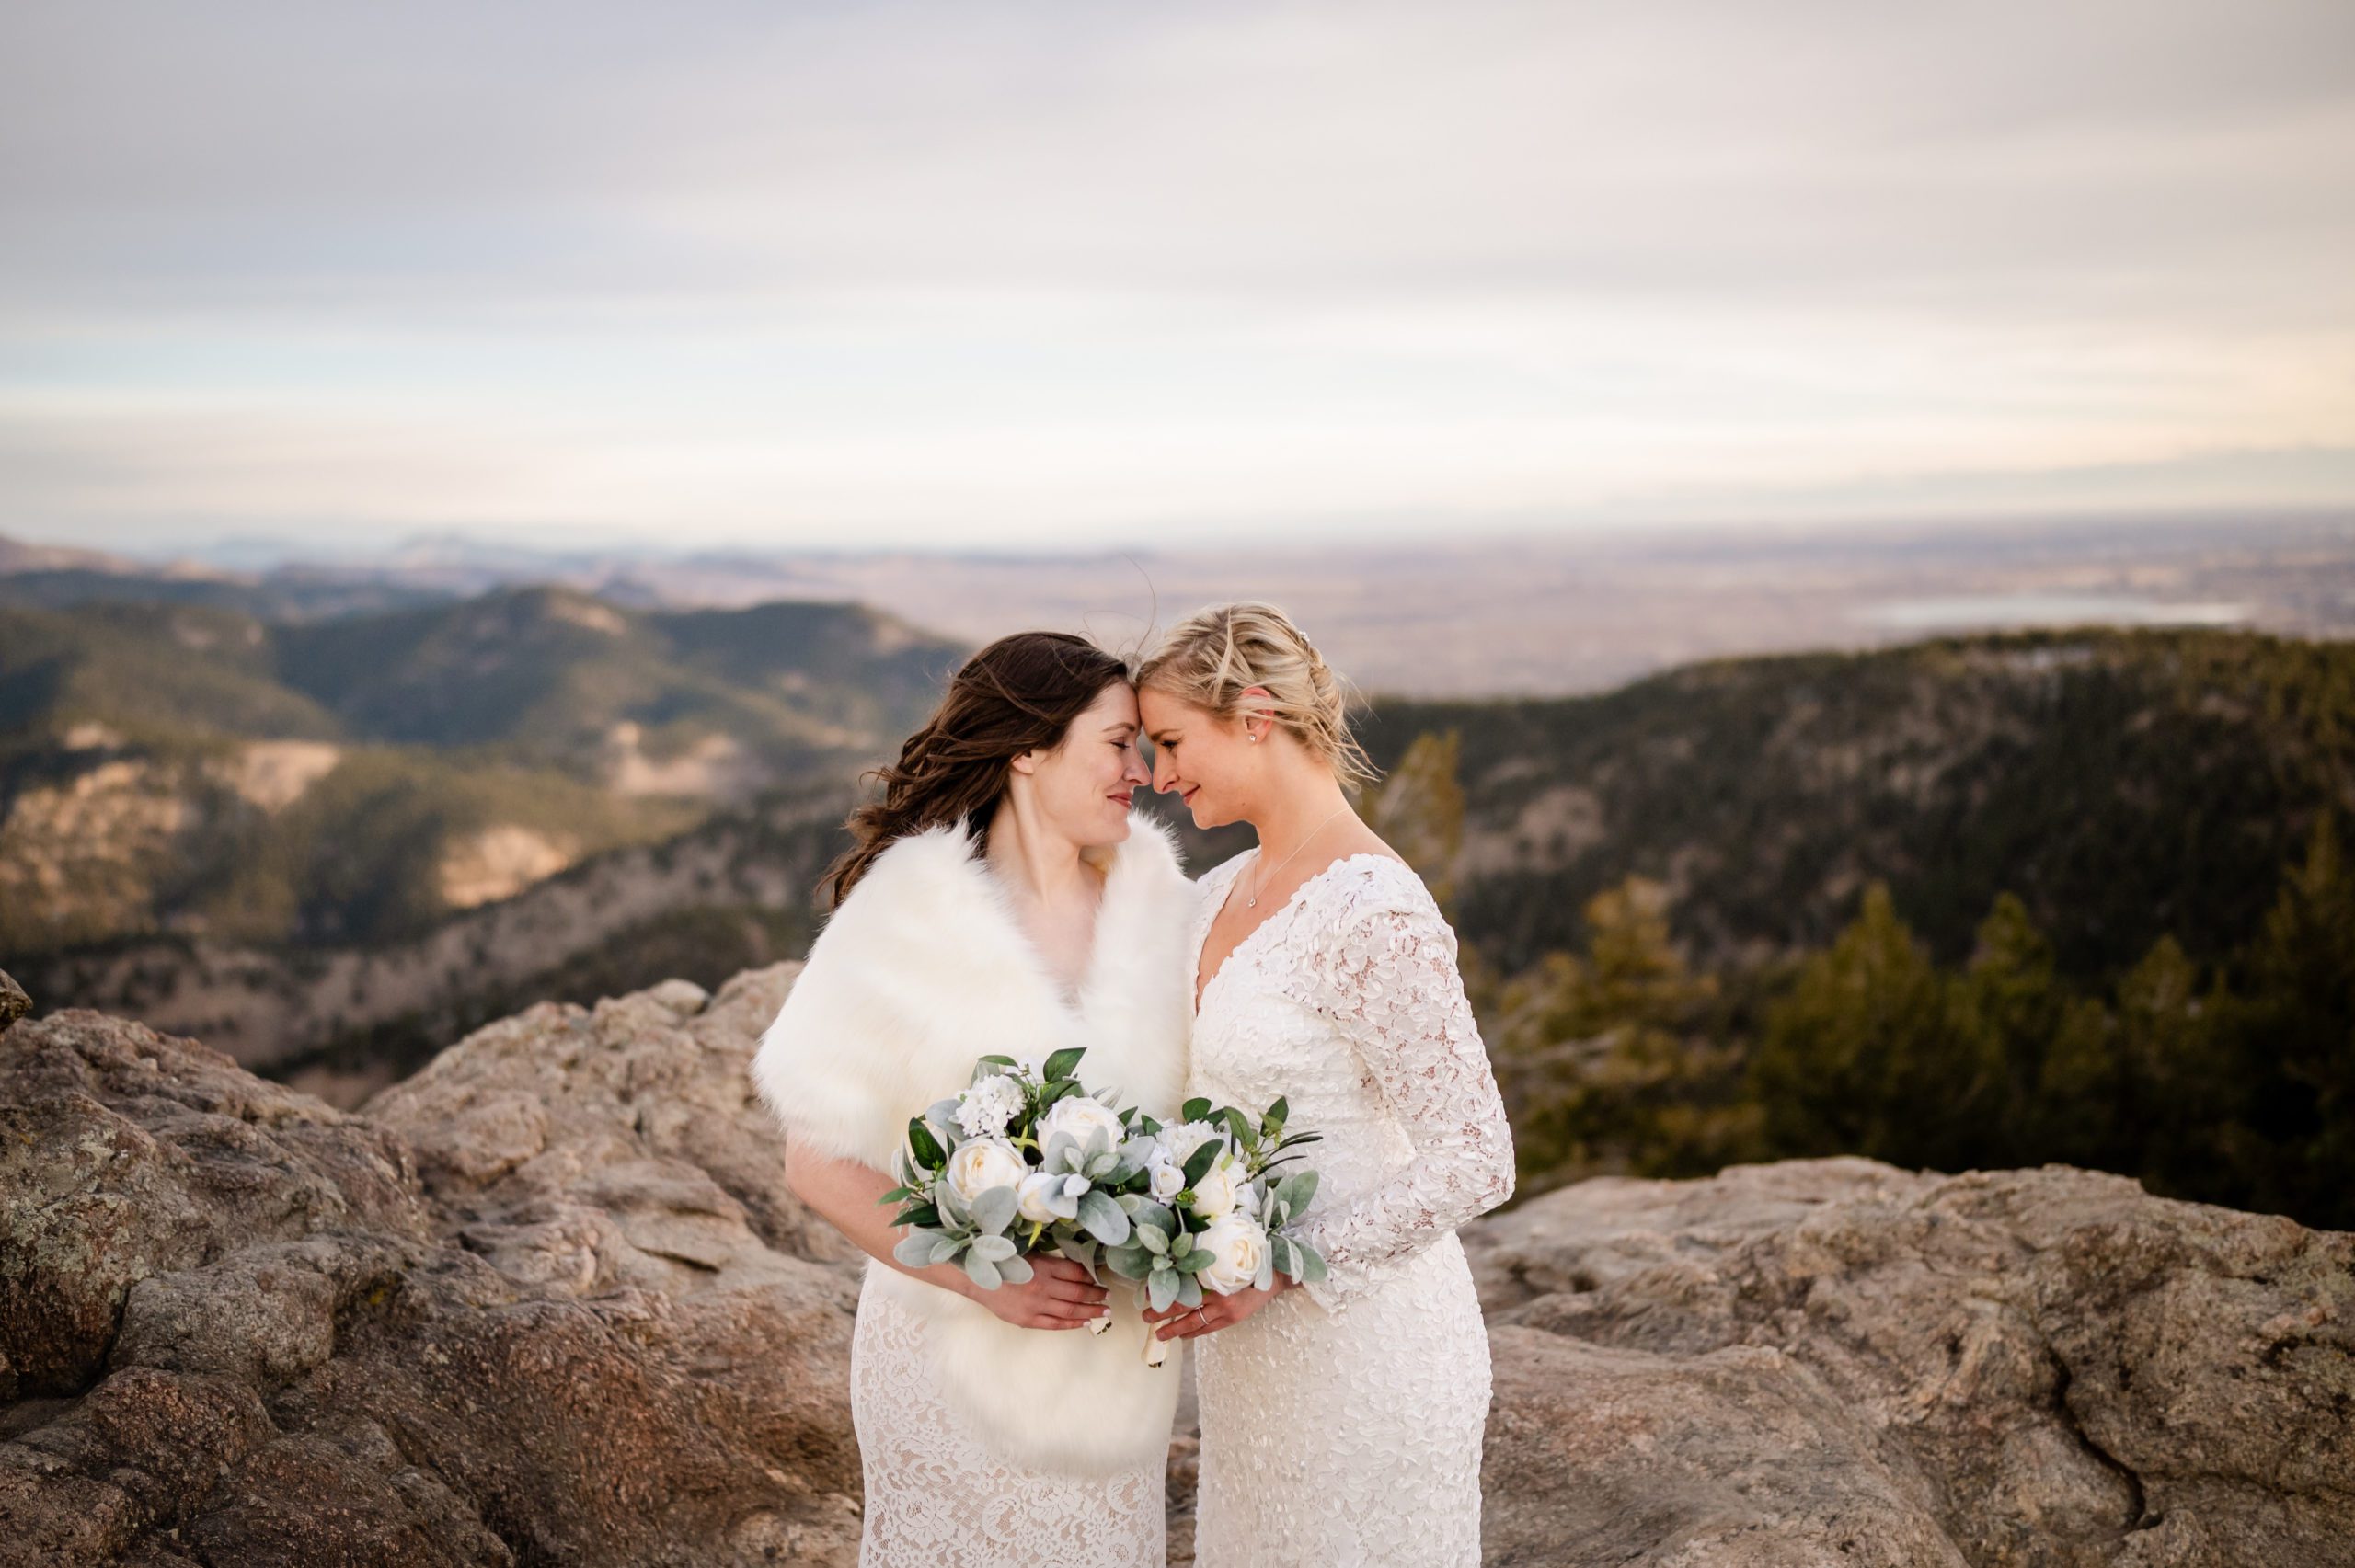 The bride's cuddle close, nose to nose at their Lost Gulch elopement. 